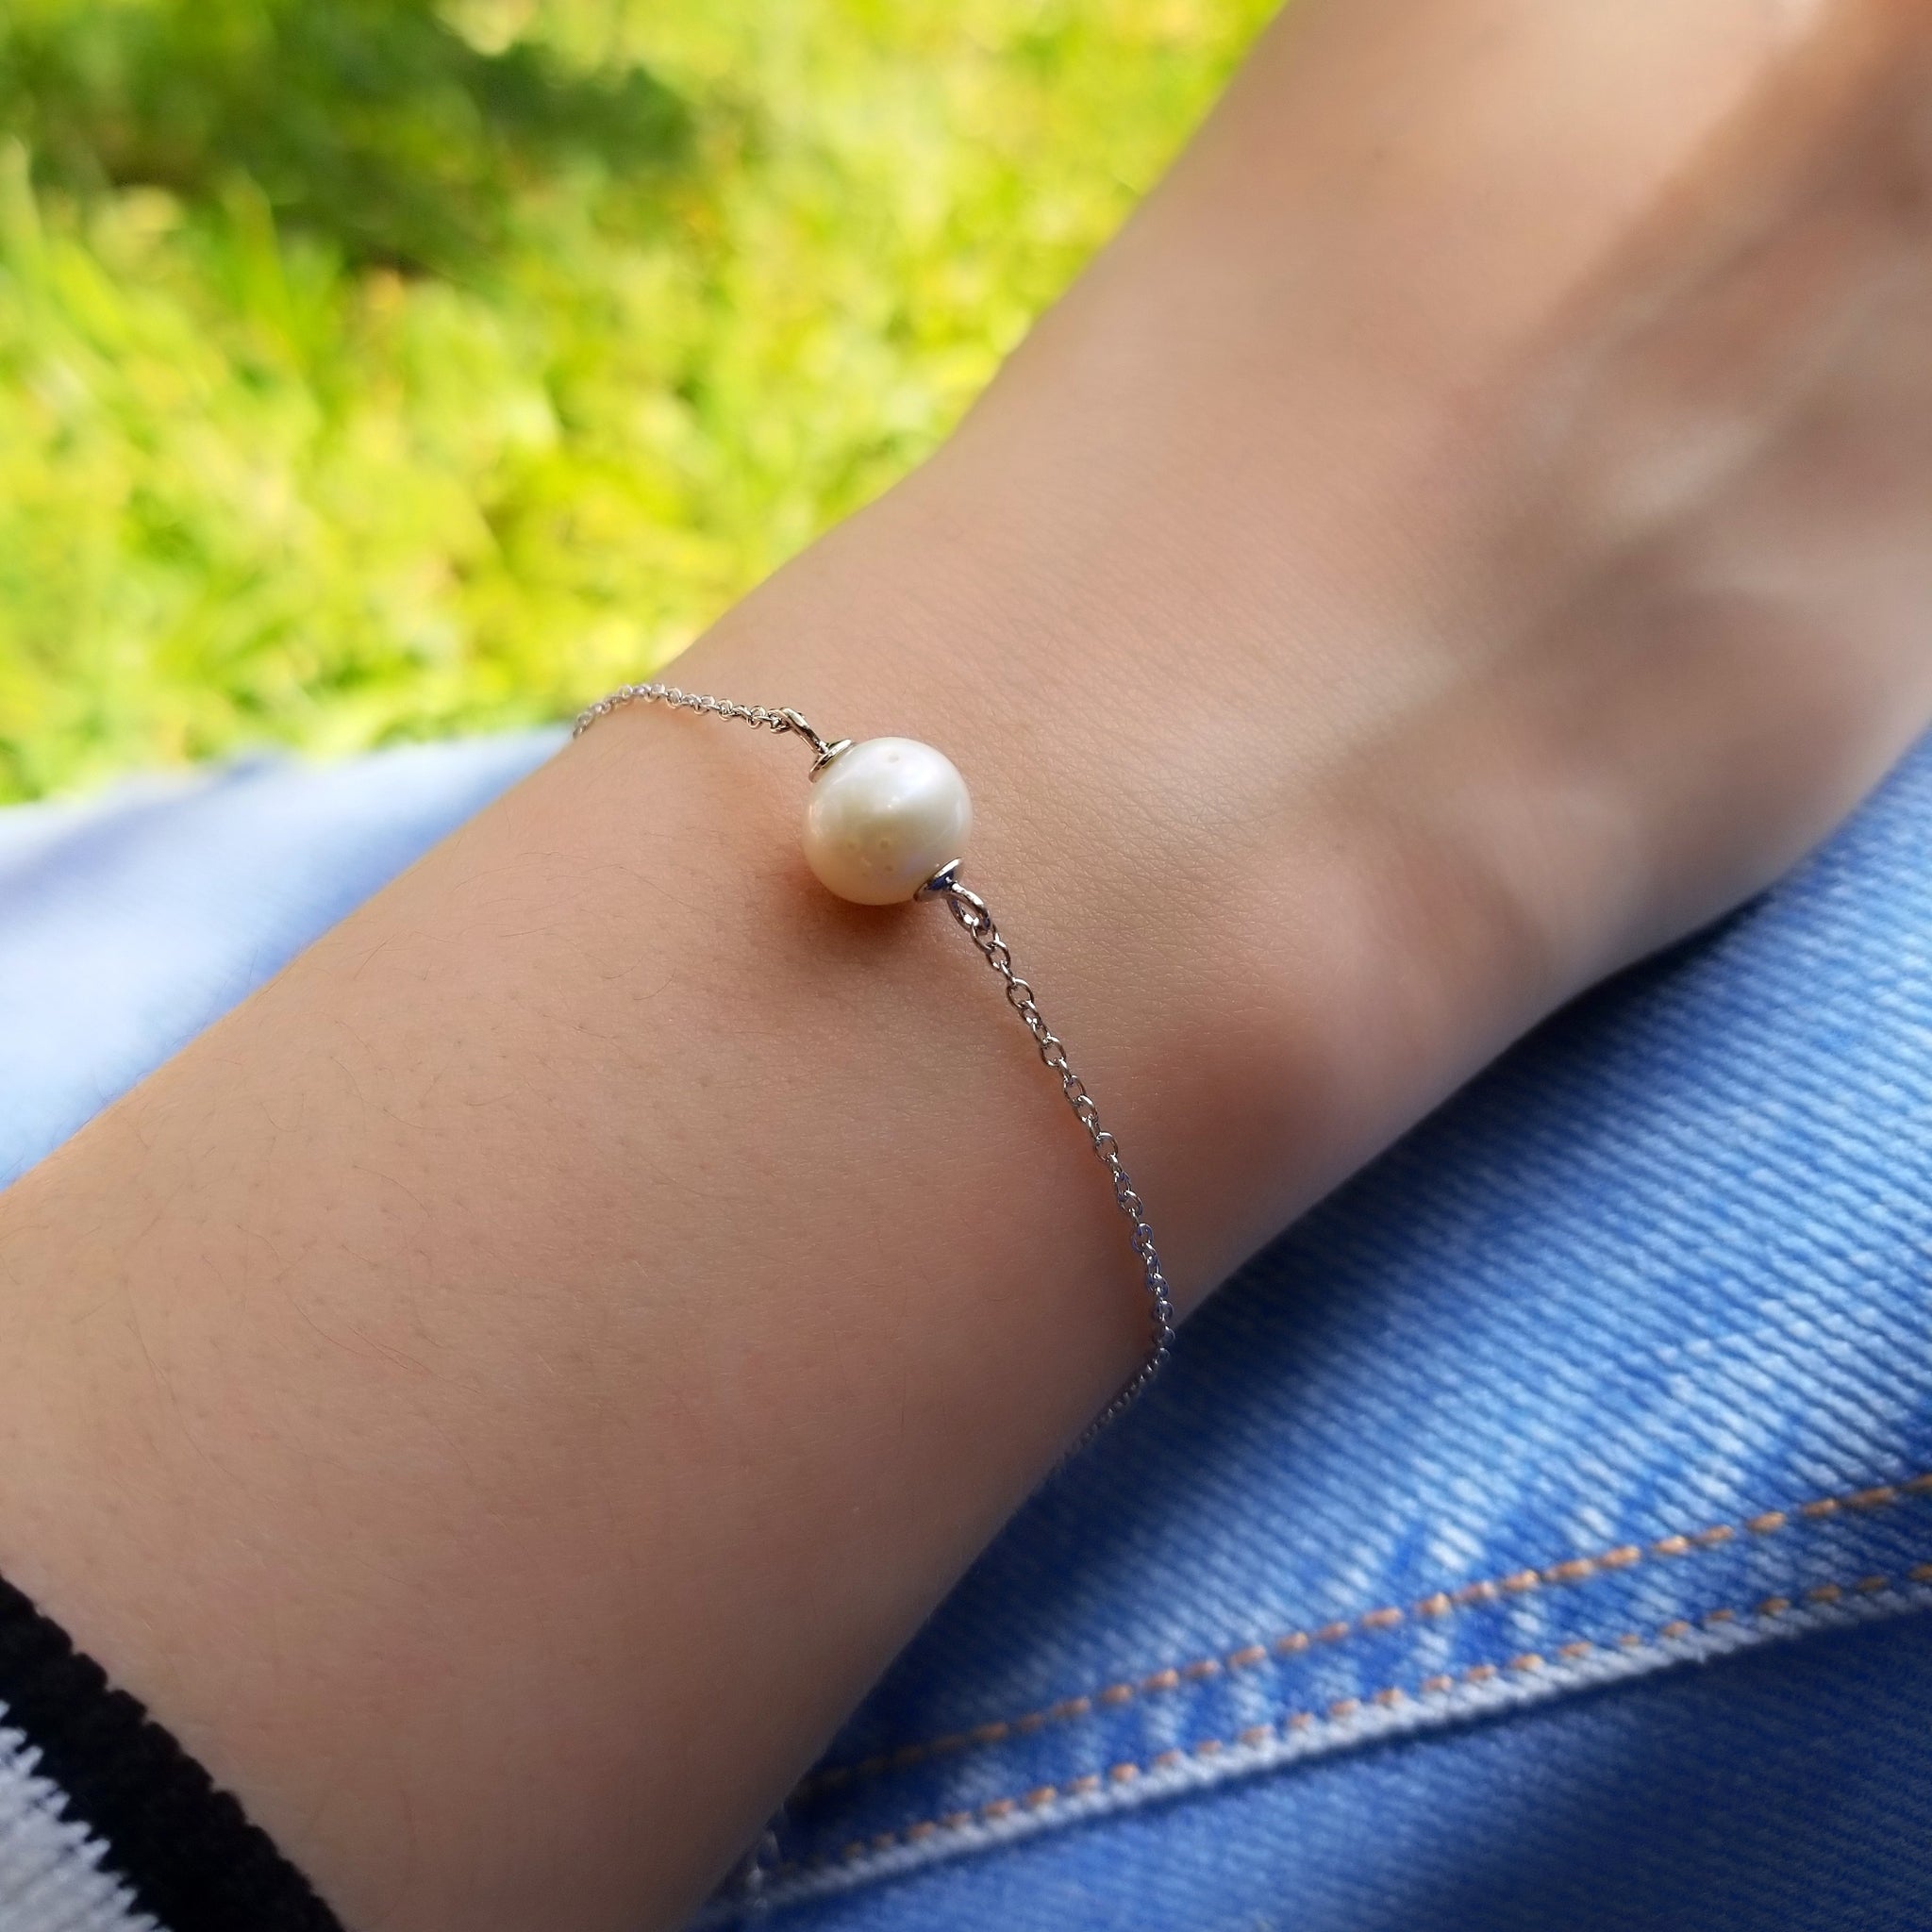 River pearl silver bracelet, white gold-plated